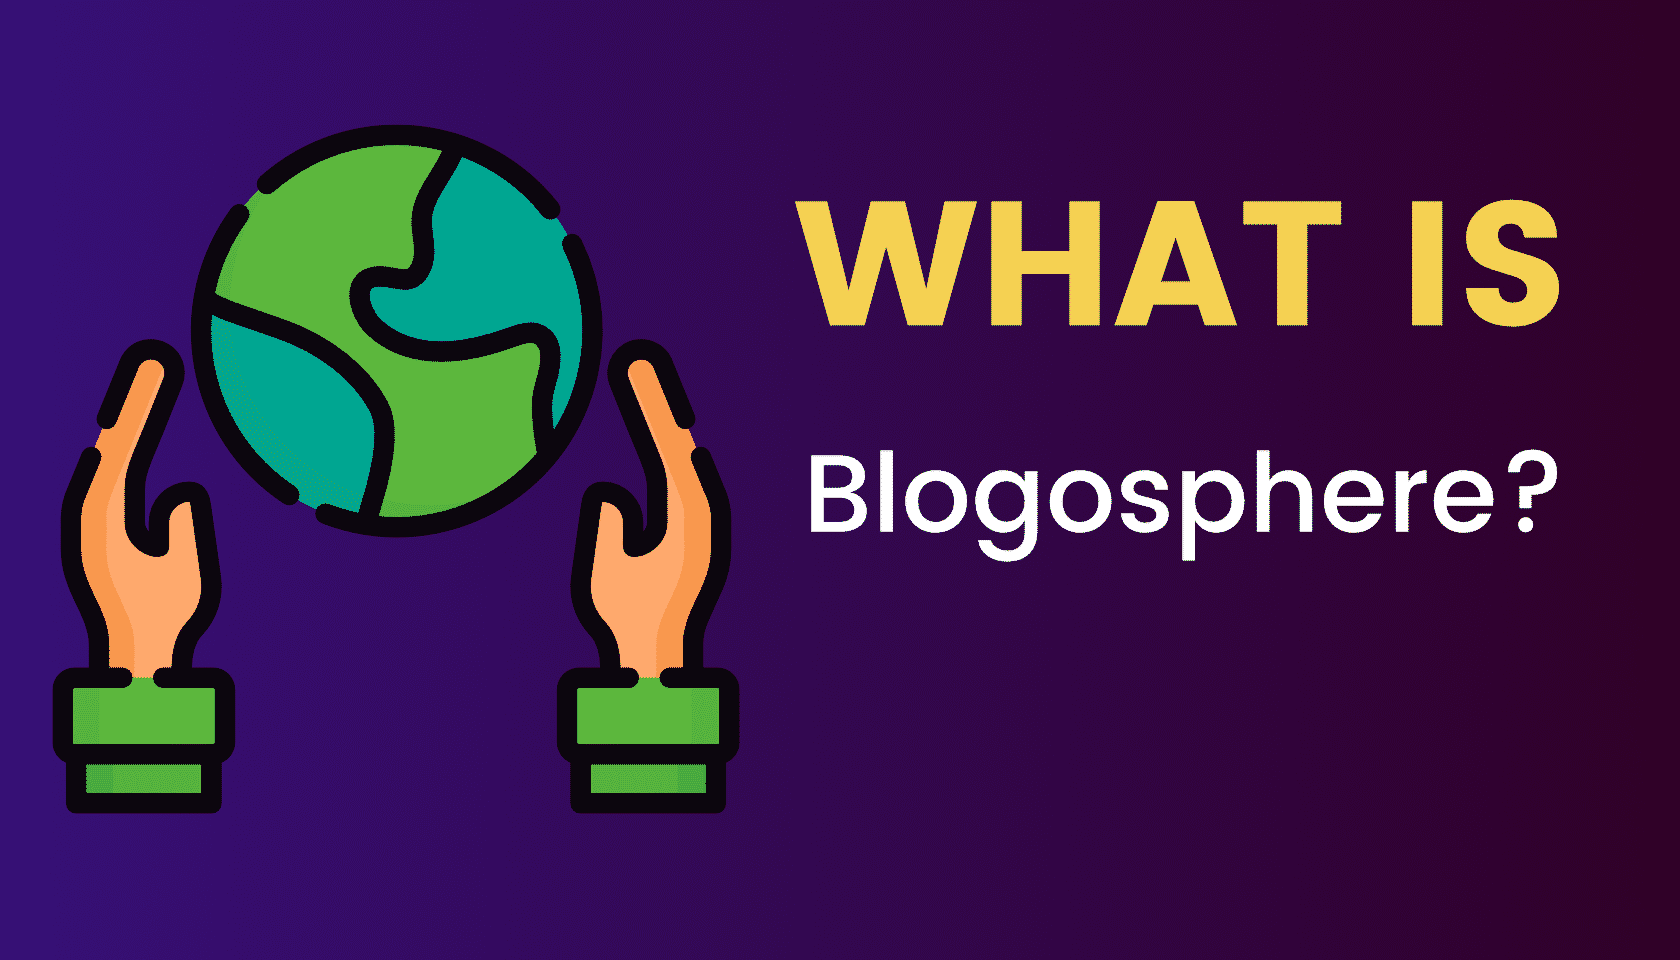 What is: Blogosphere